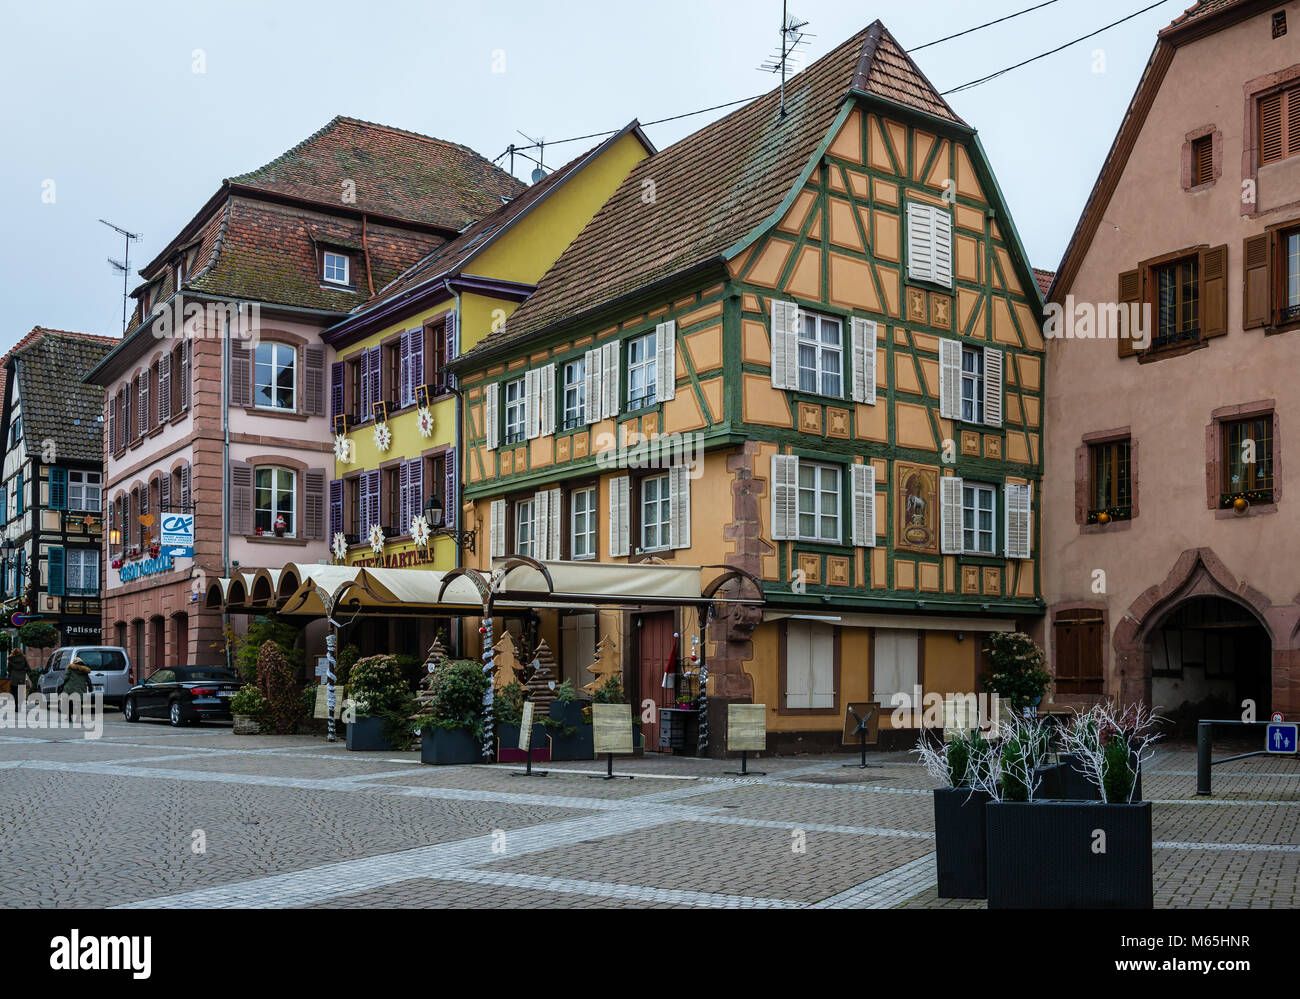 Colourful half-timbered houses in the picturesque village of Ribeauville, in Alsace Wine Route, France. Stock Photo